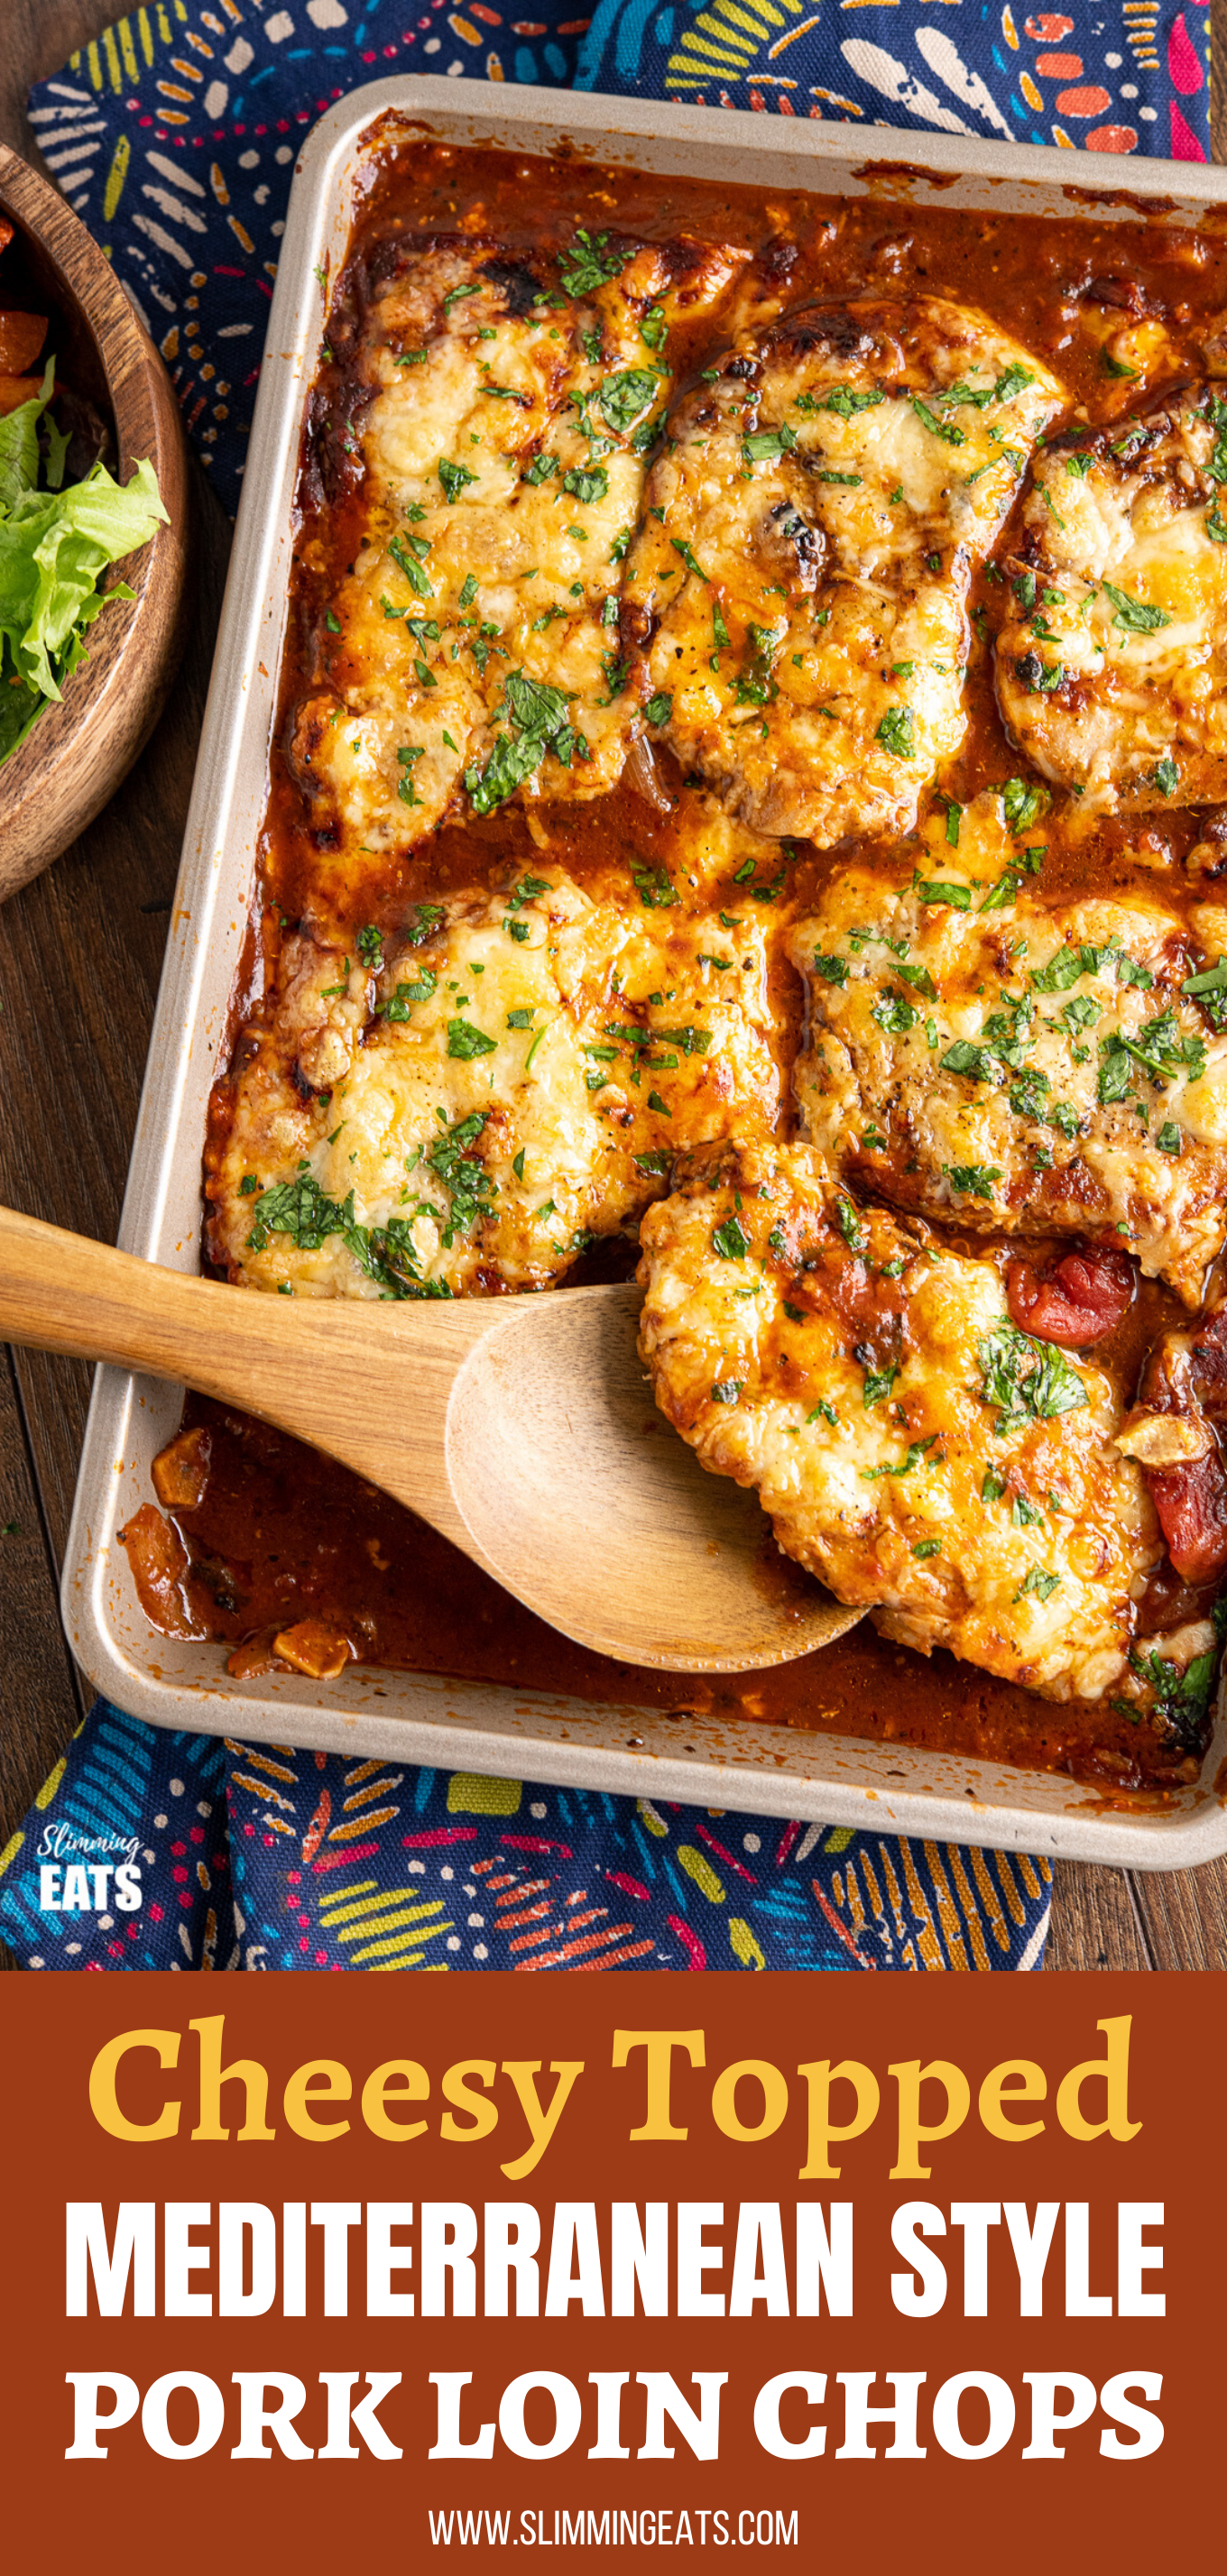 Cheesy Topped Mediterranean Pork Loin Chops on baking tray with wooden spoon pin image